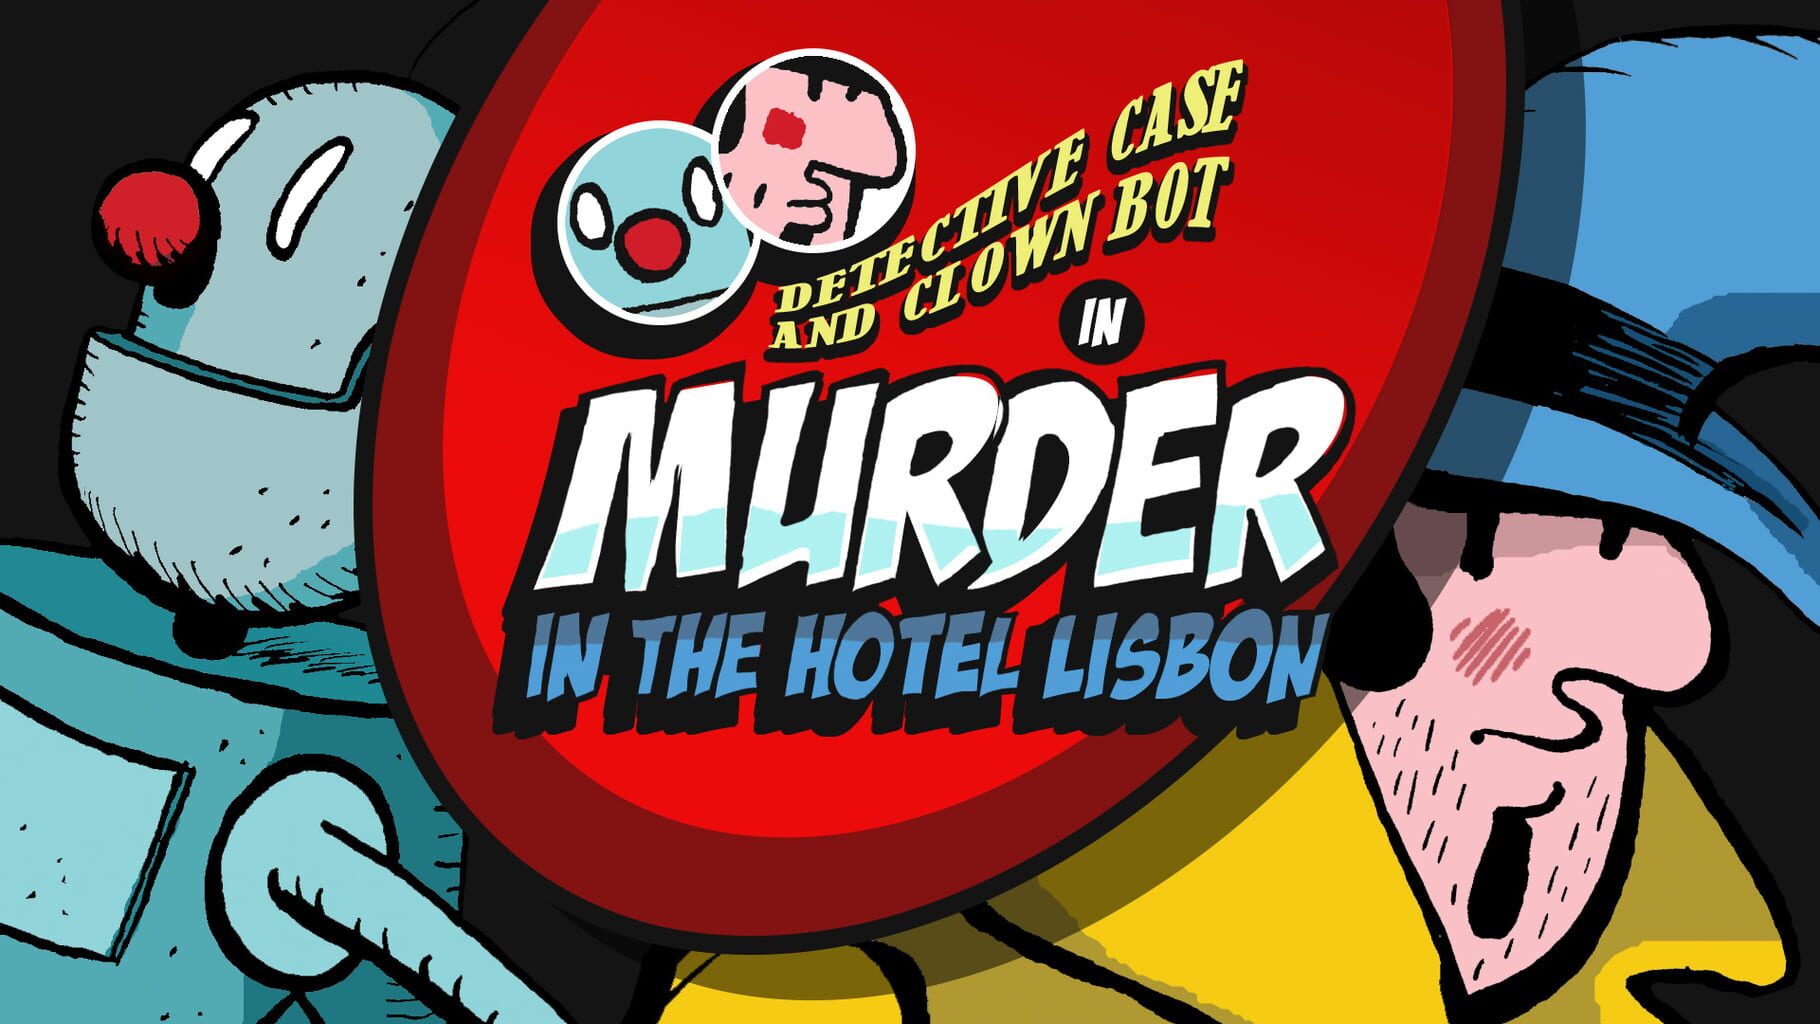 Detective Case and Clown Bot in: Murder in the Hotel Lisbon artwork